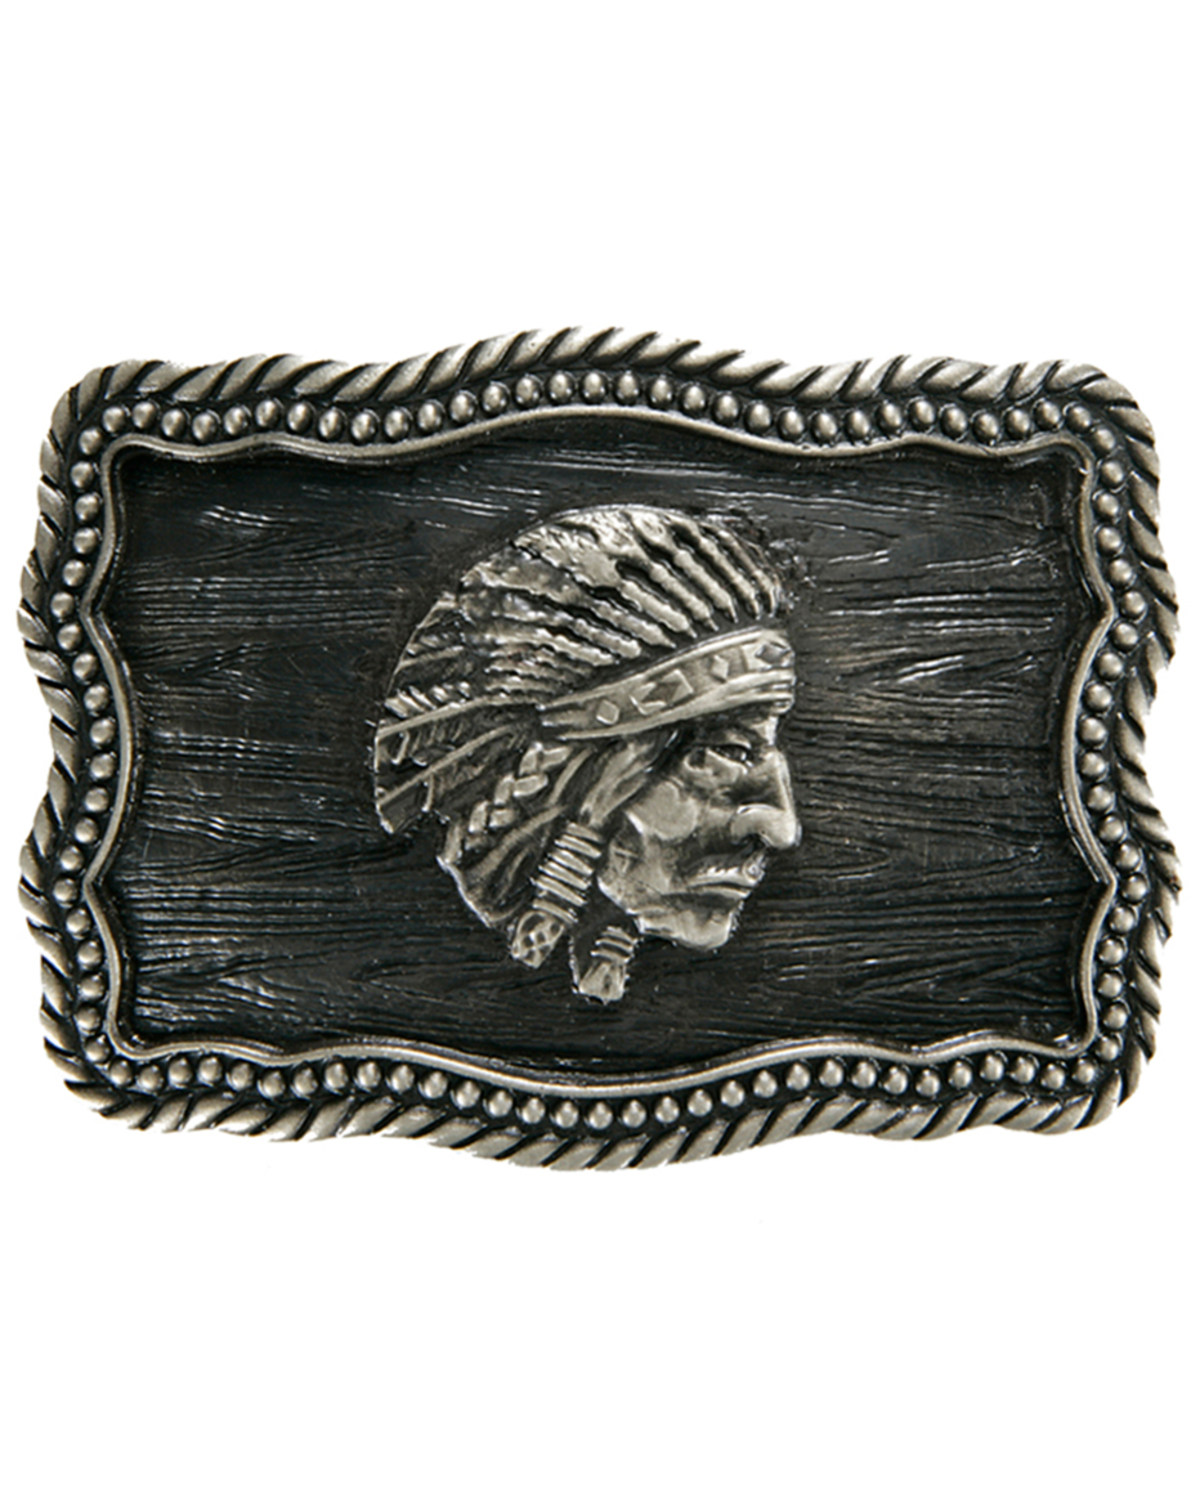 AndWest Indian Chief Iconic Buckle